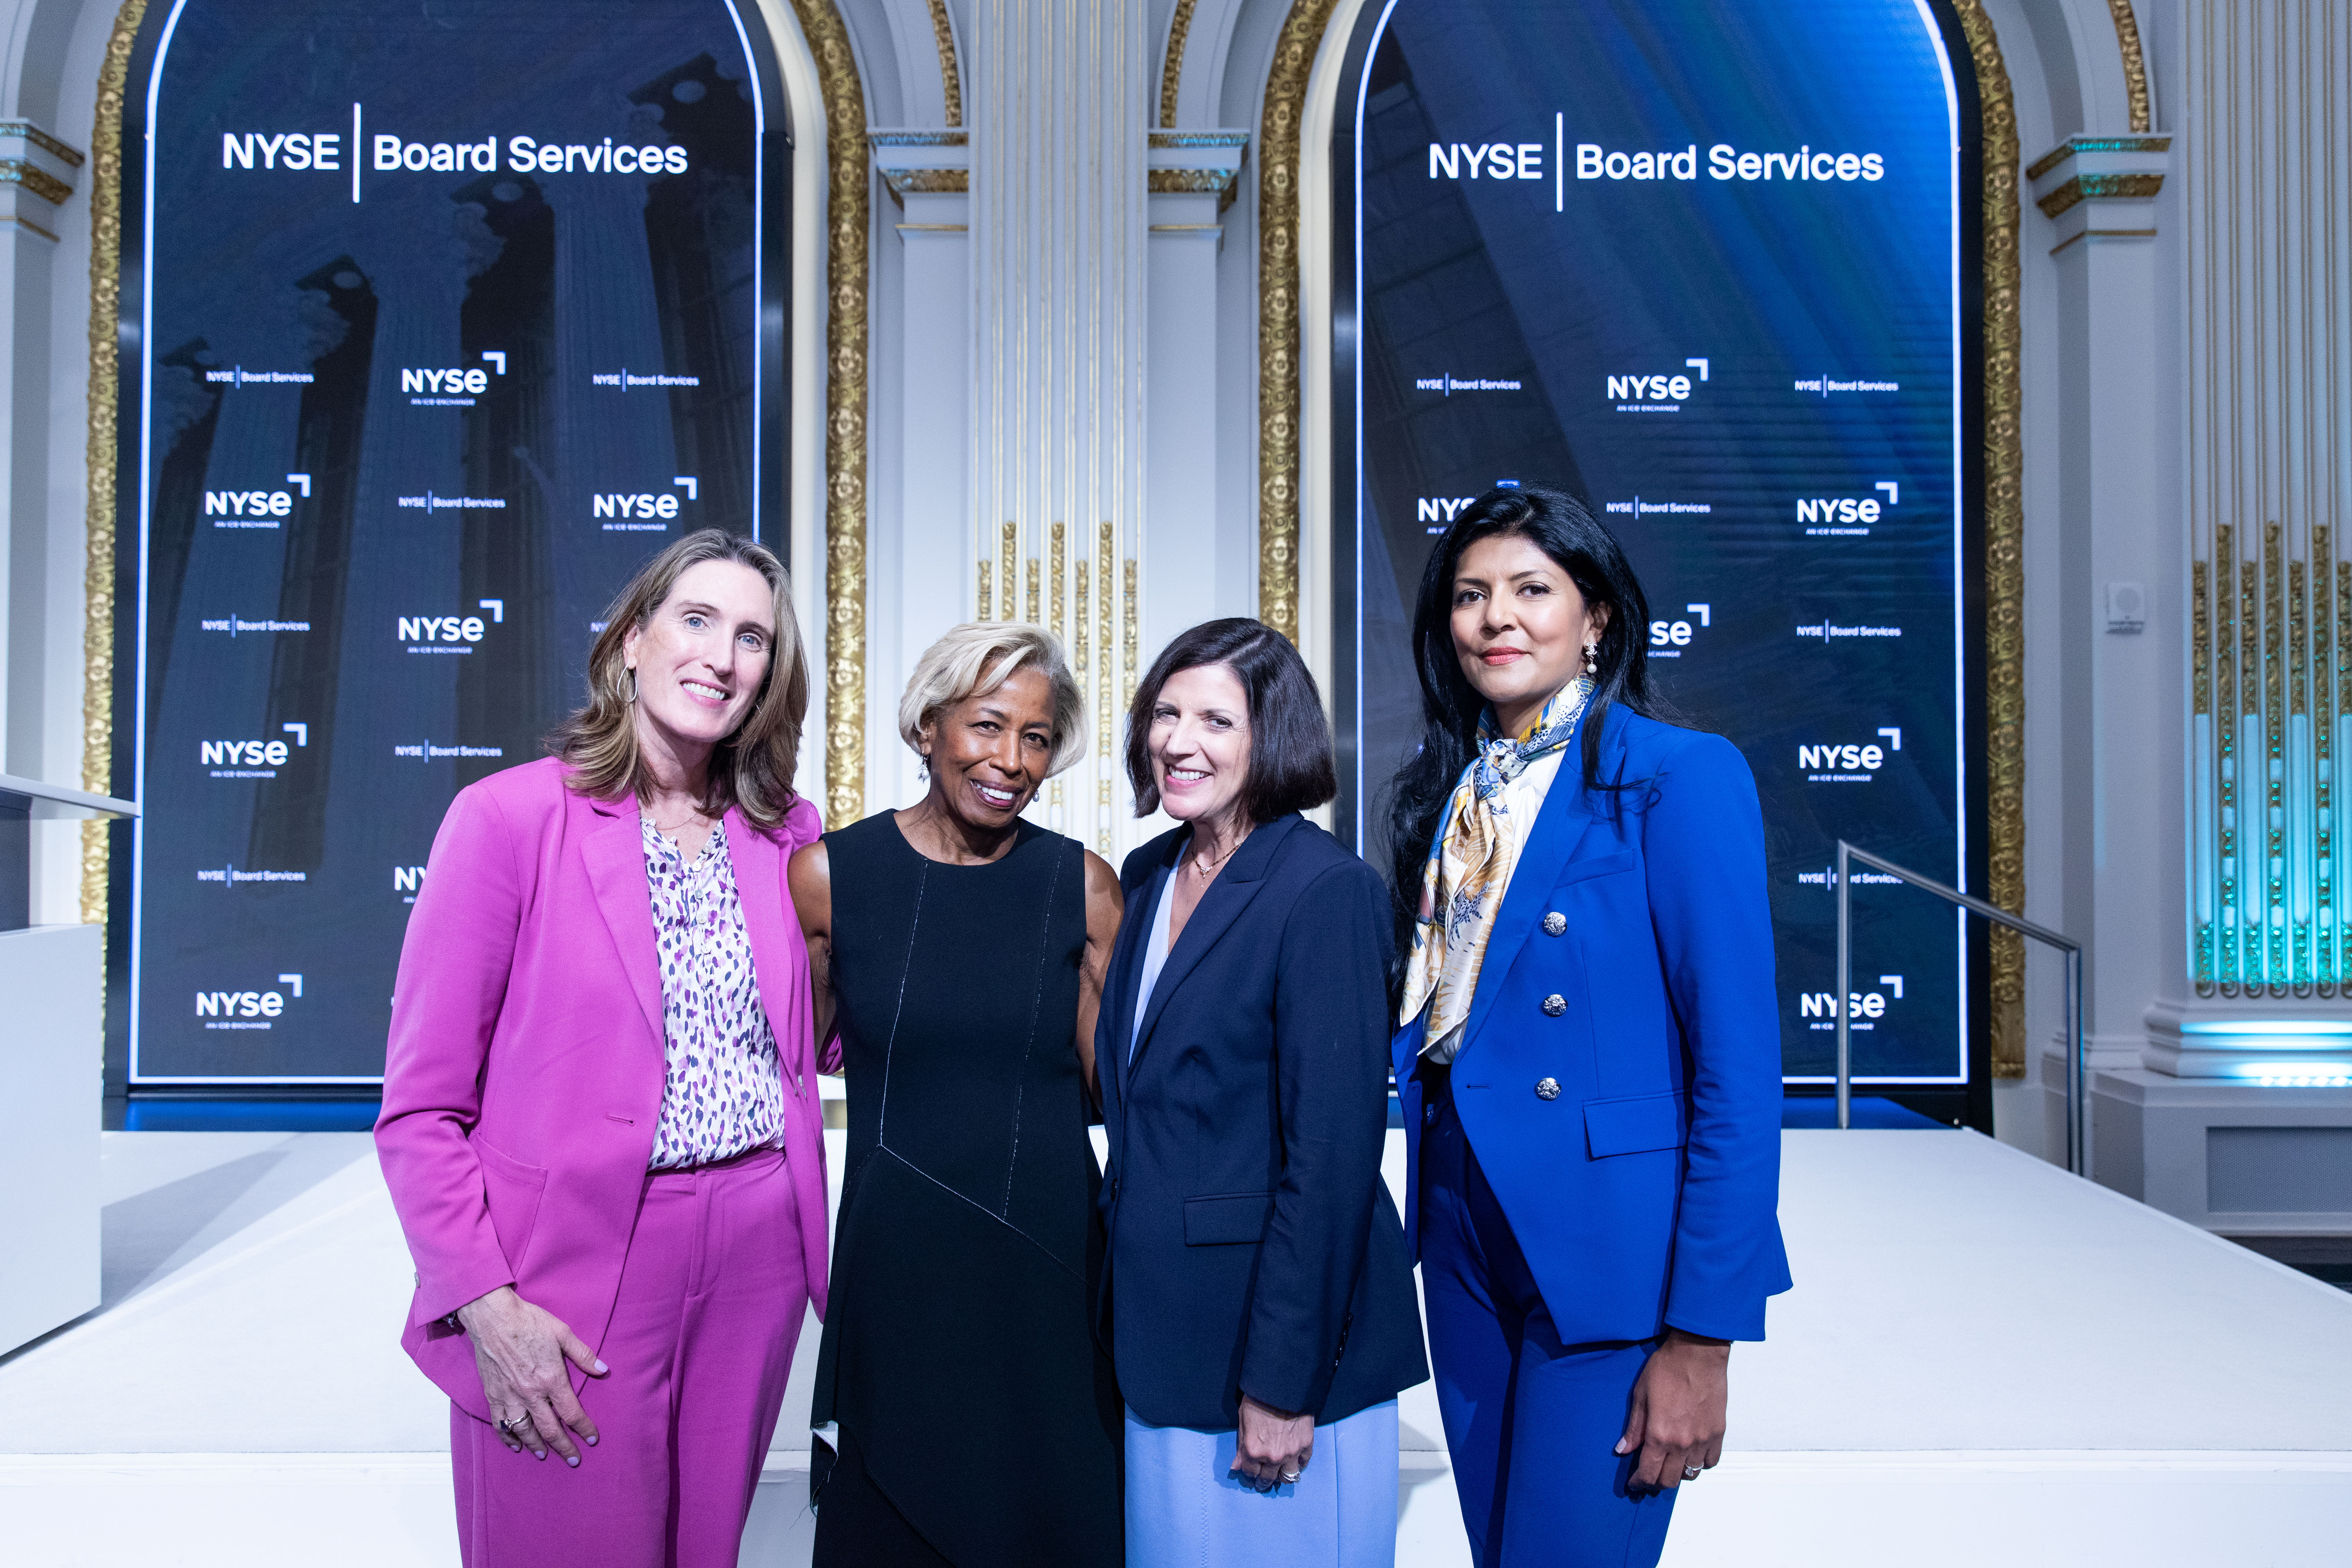 Suzanne Brown, Sharon Bowen, Cindy Baier, and Duriya Farooqui at the NYSE Board Services 5th Anniversary Celebration